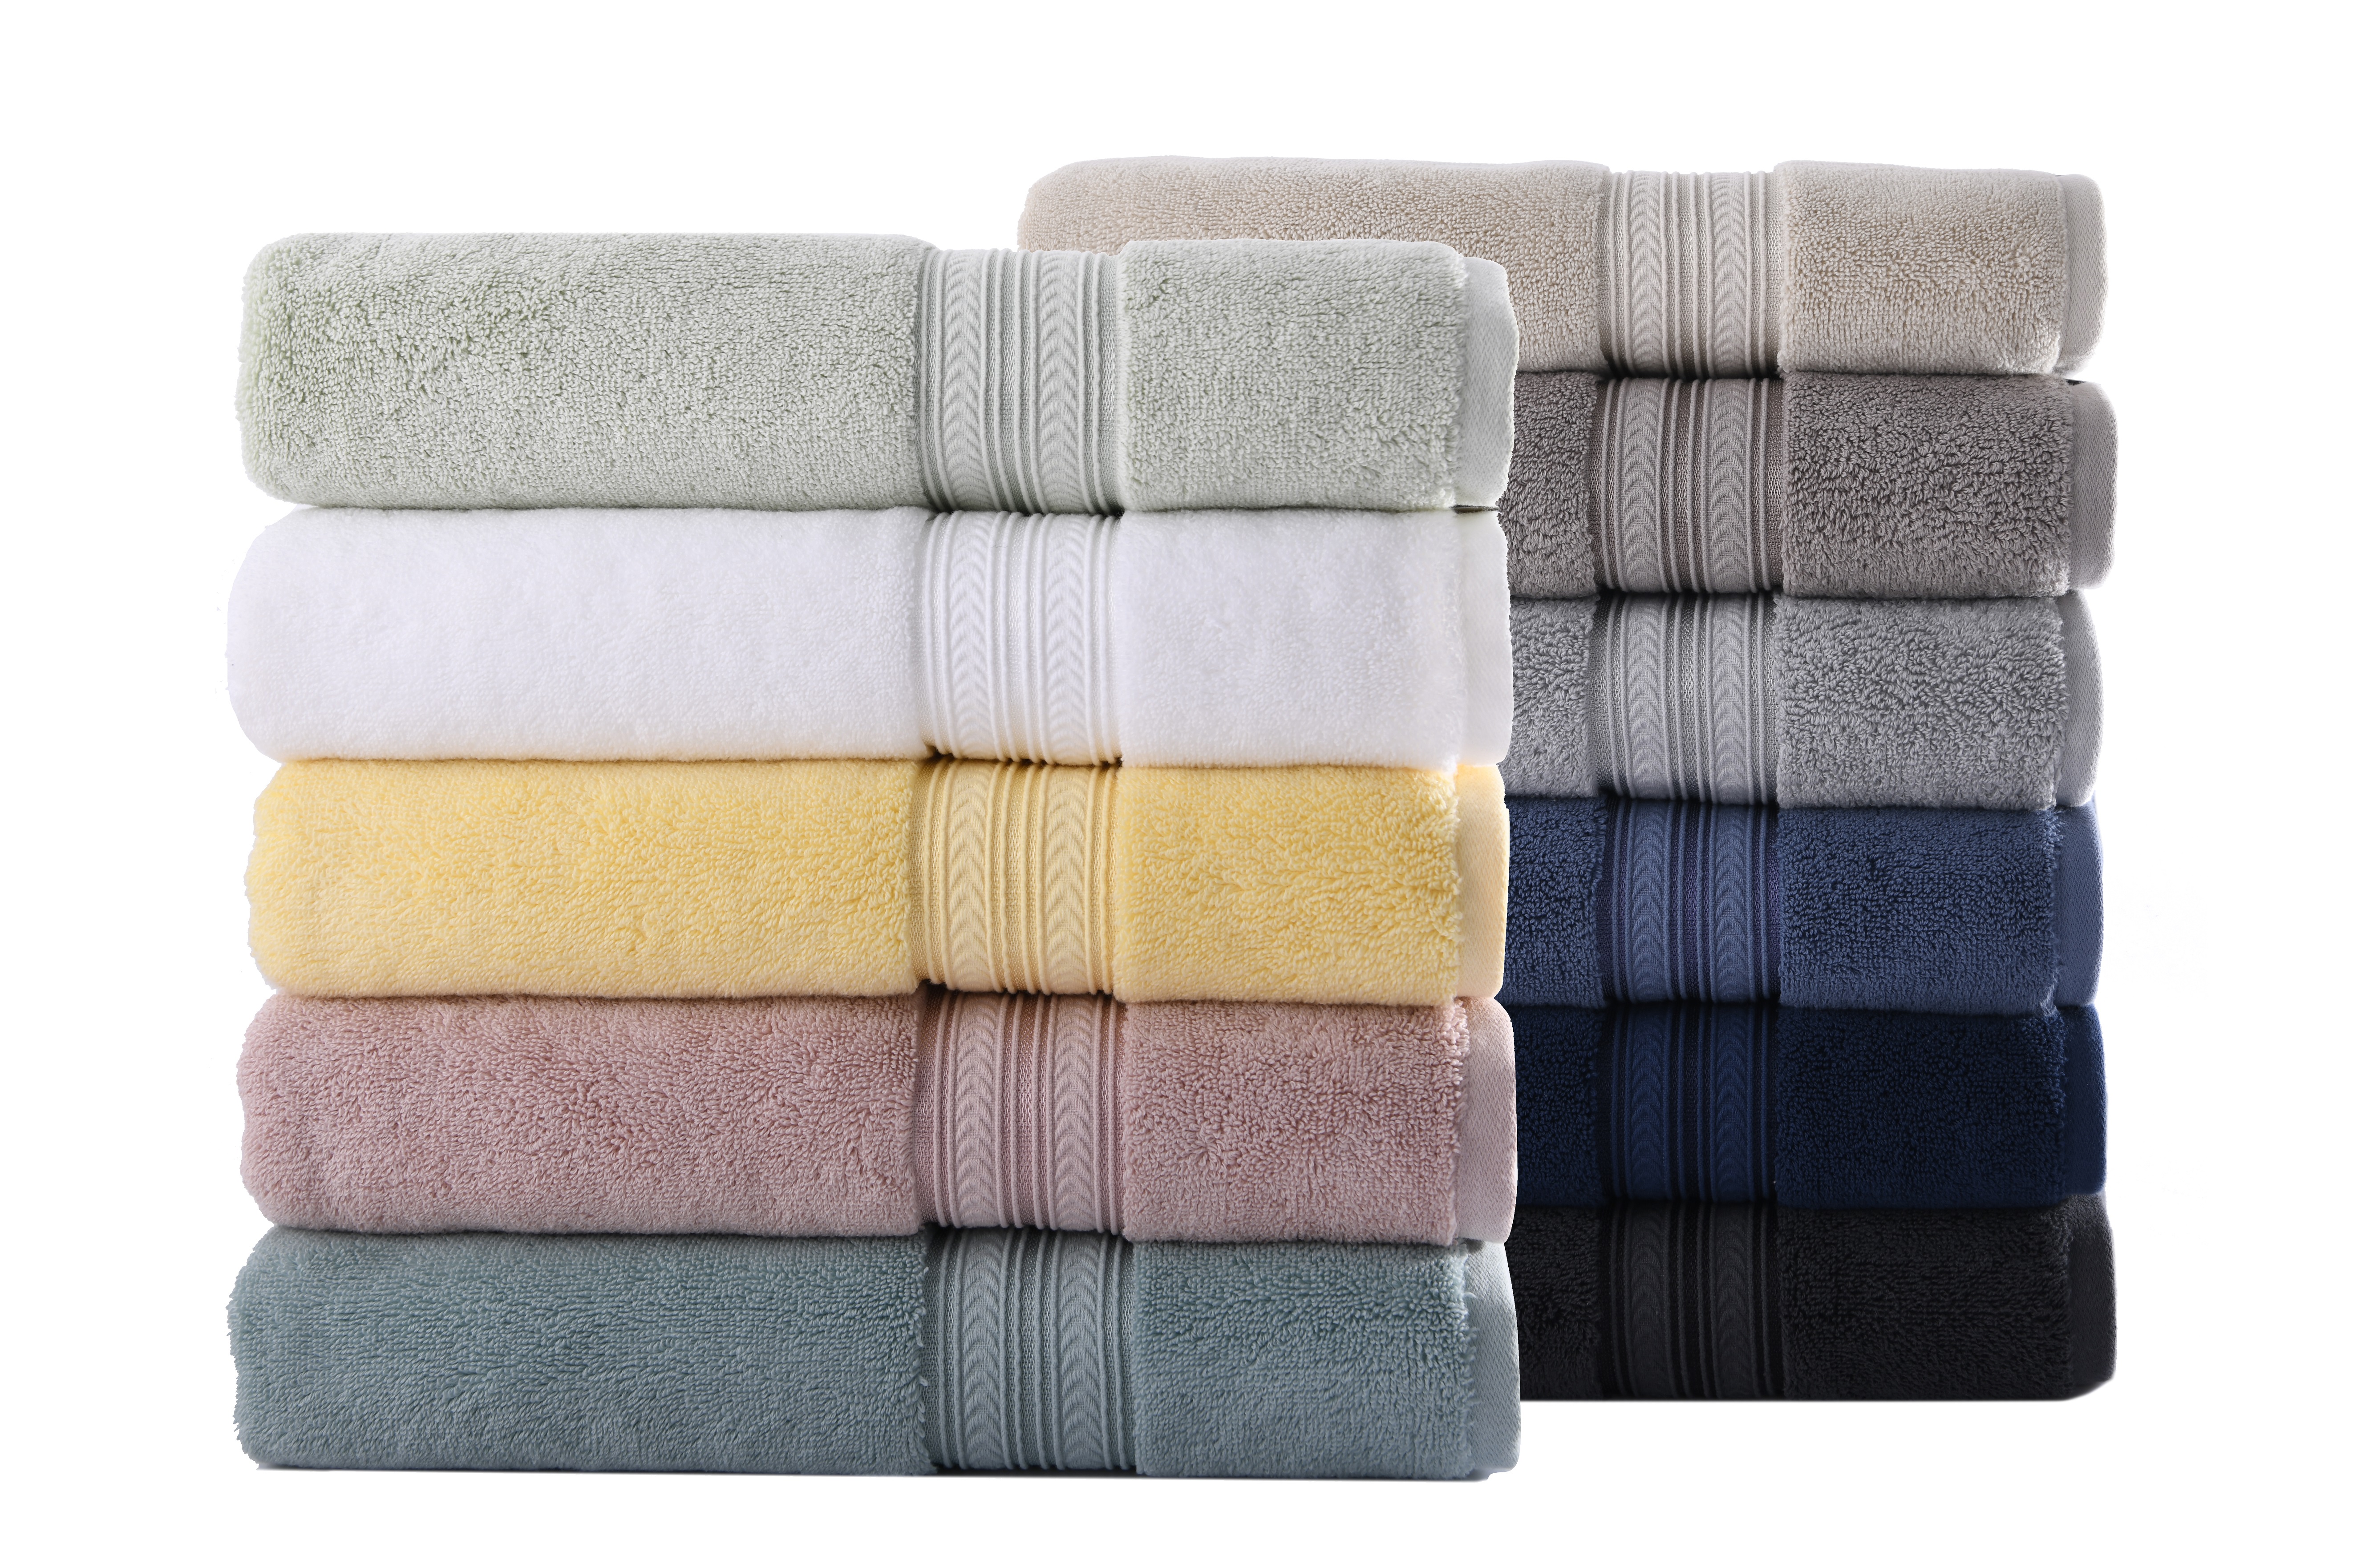 Insignia Blue 6PC Bath Towel Set, Better Homes & Gardens Thick and Plush Collection - image 4 of 5